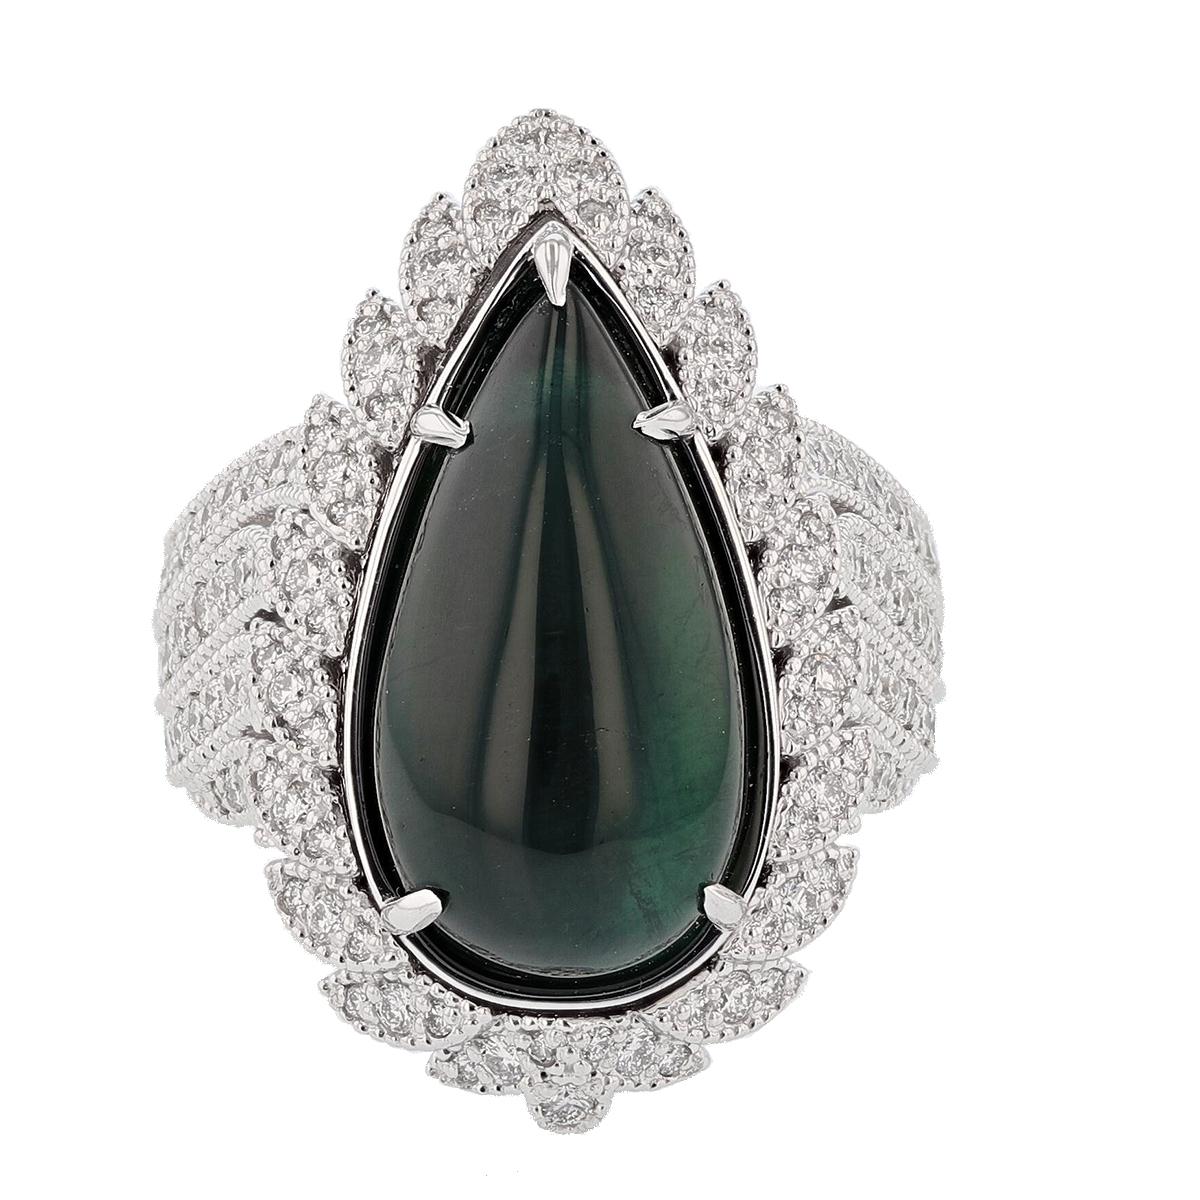 This ring is made in 14k white gold with winged feather inspired design and features an 11.48ct cabochon green tourmaline pear shape, prong set. It also features 142 round cut diamonds weighing 1.29ct prong set color grade (G) clarity grade (VS2).